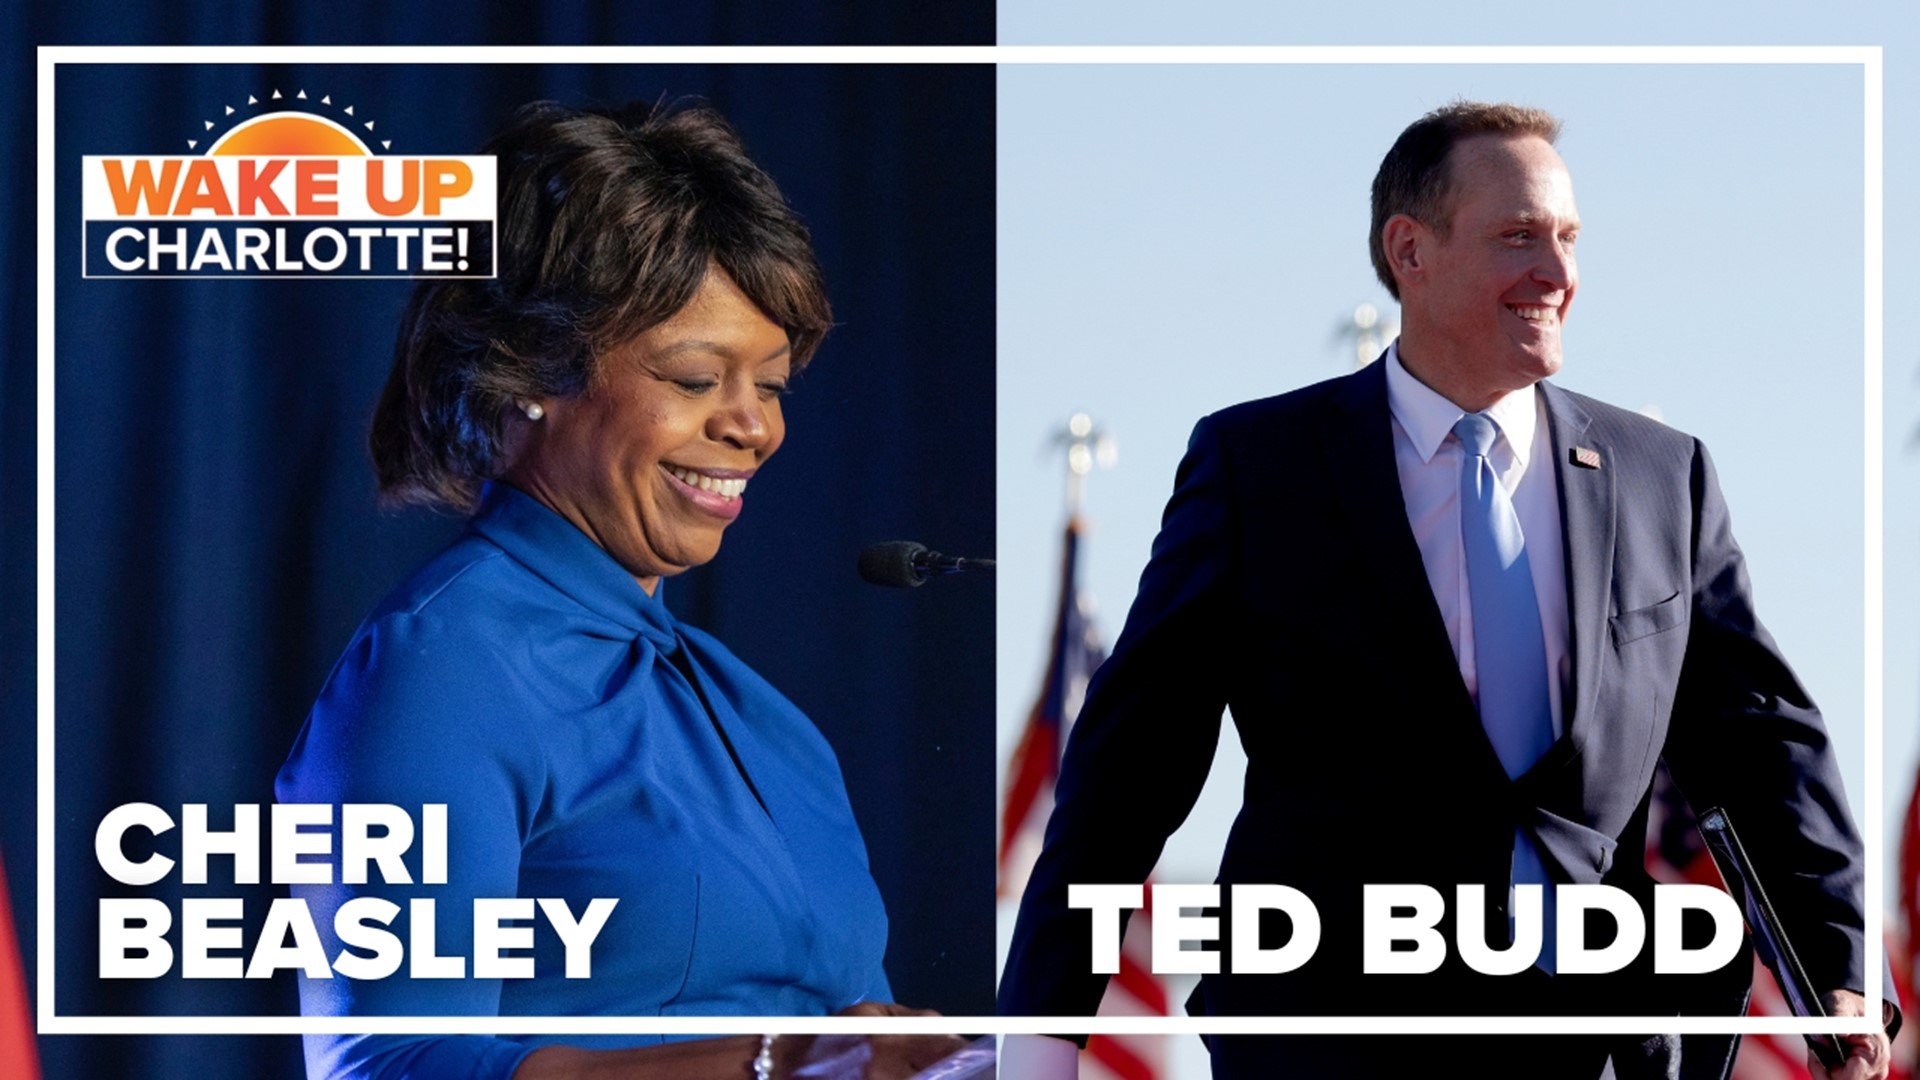 Election day is about a month away, and right now the two leading candidates are locked in a tight race.